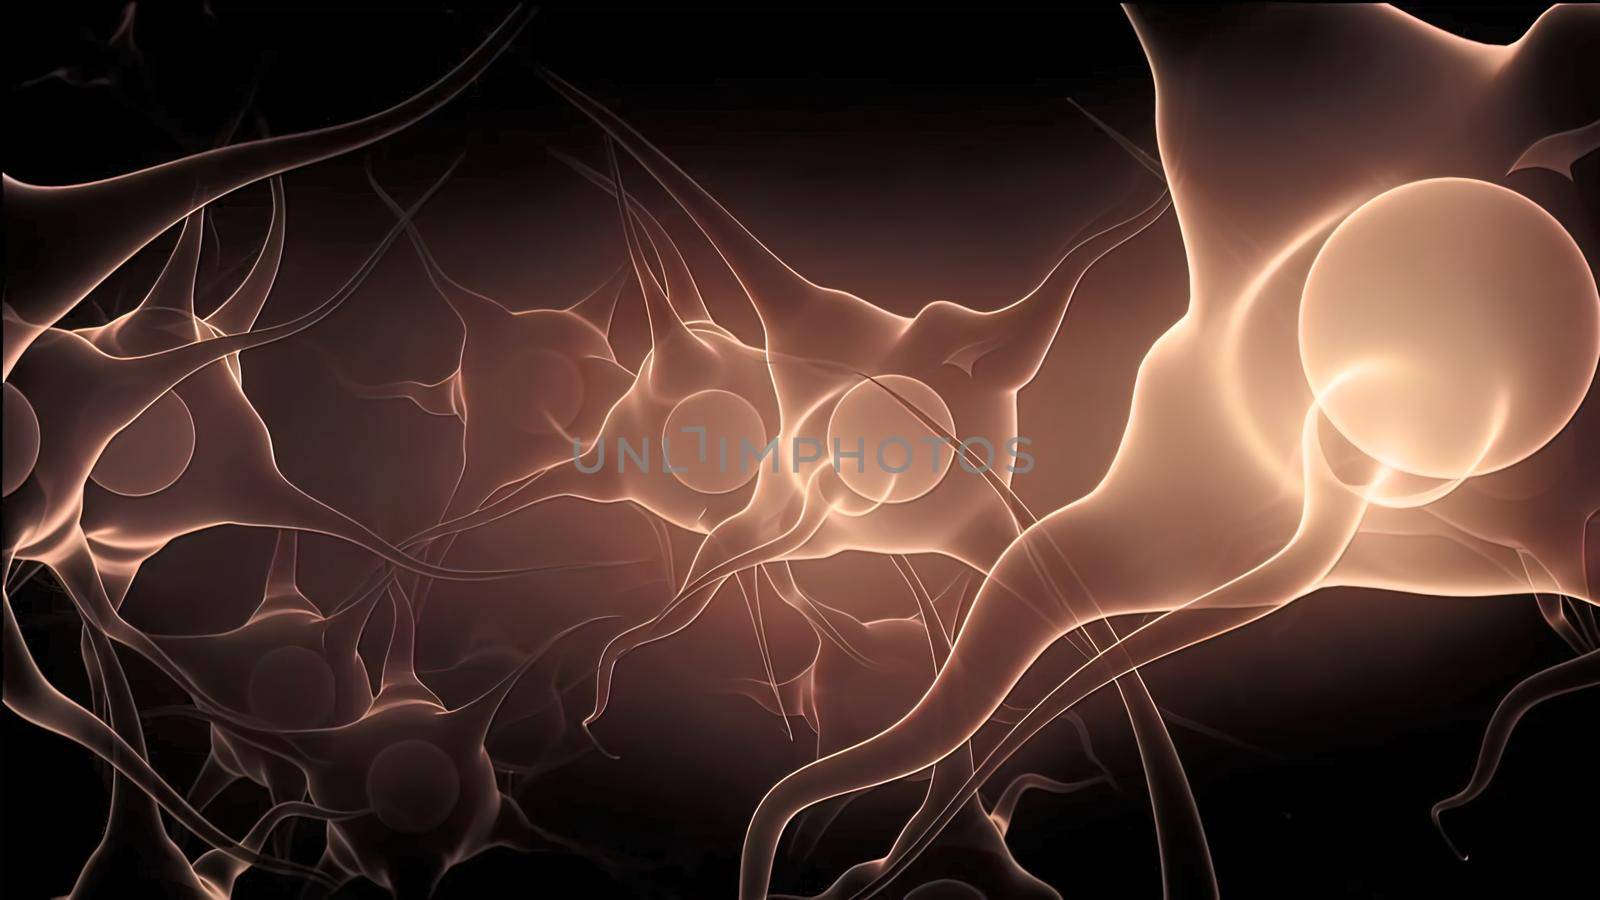 Neuron and synapses 3d , medical illustration.